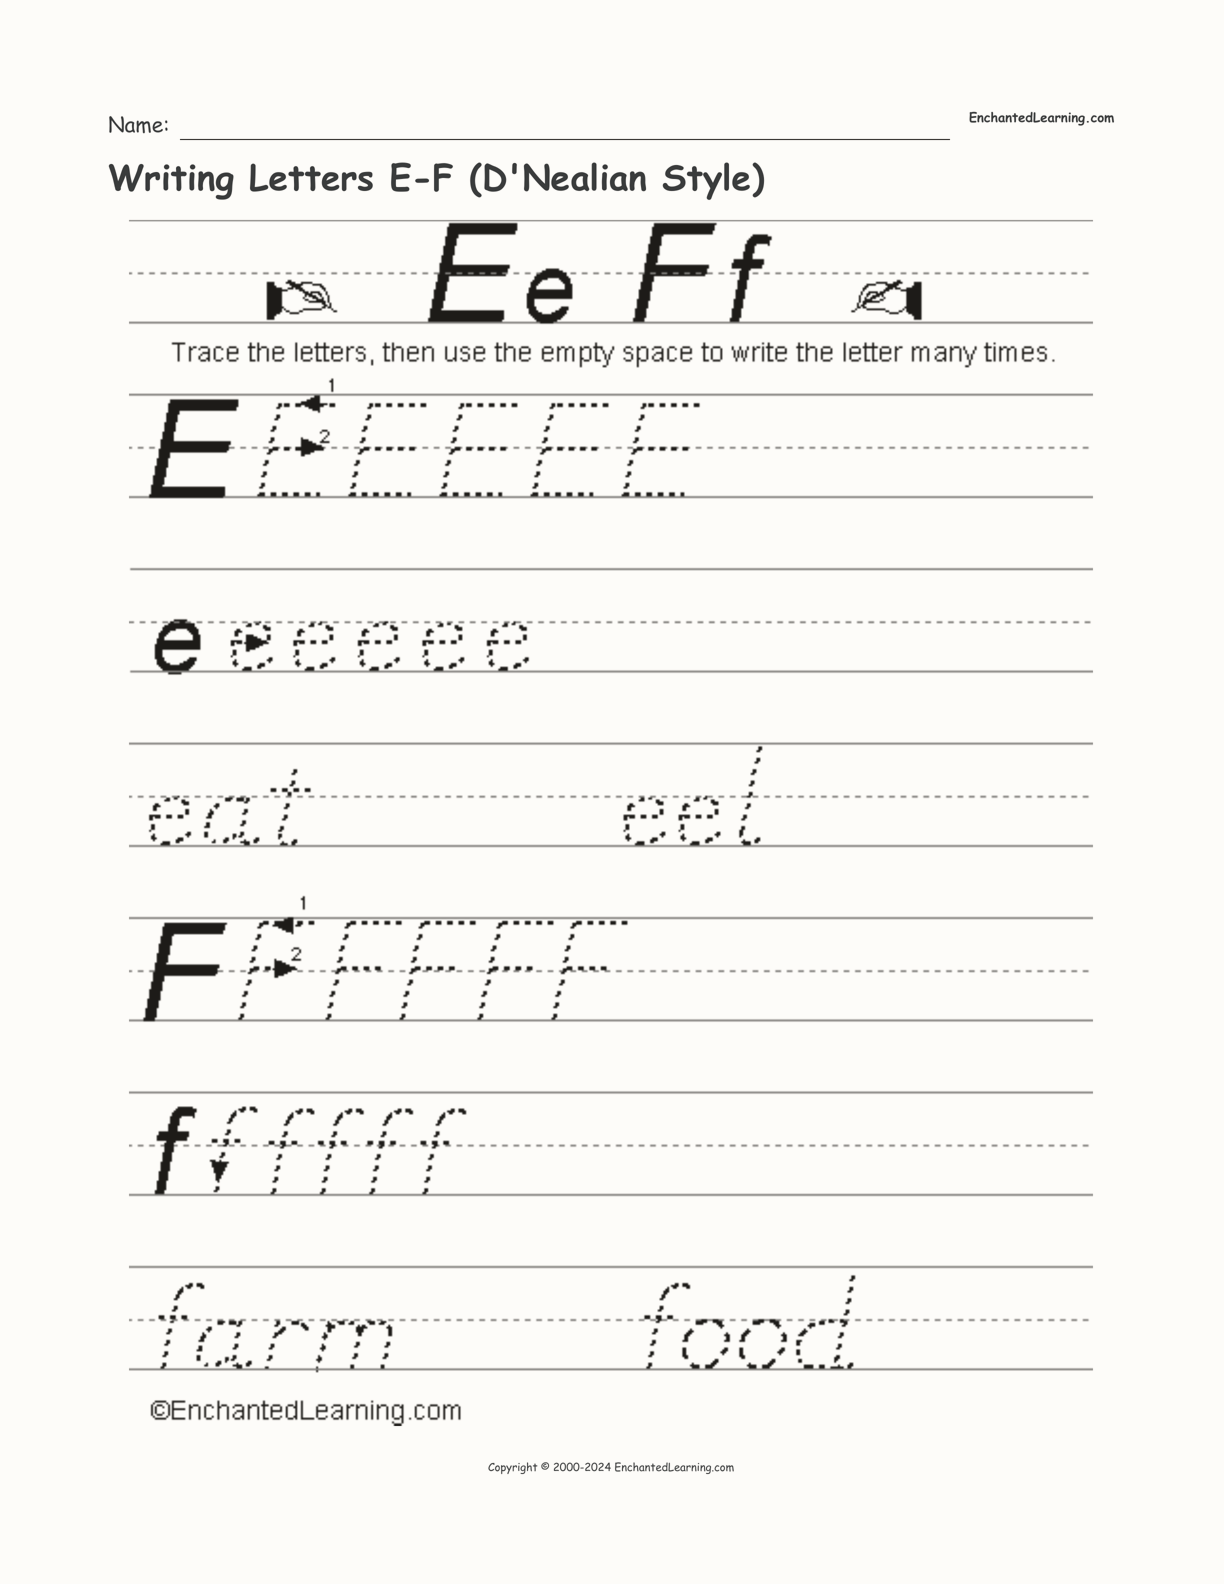 Writing Letters E-F (D'Nealian Style) interactive worksheet page 1